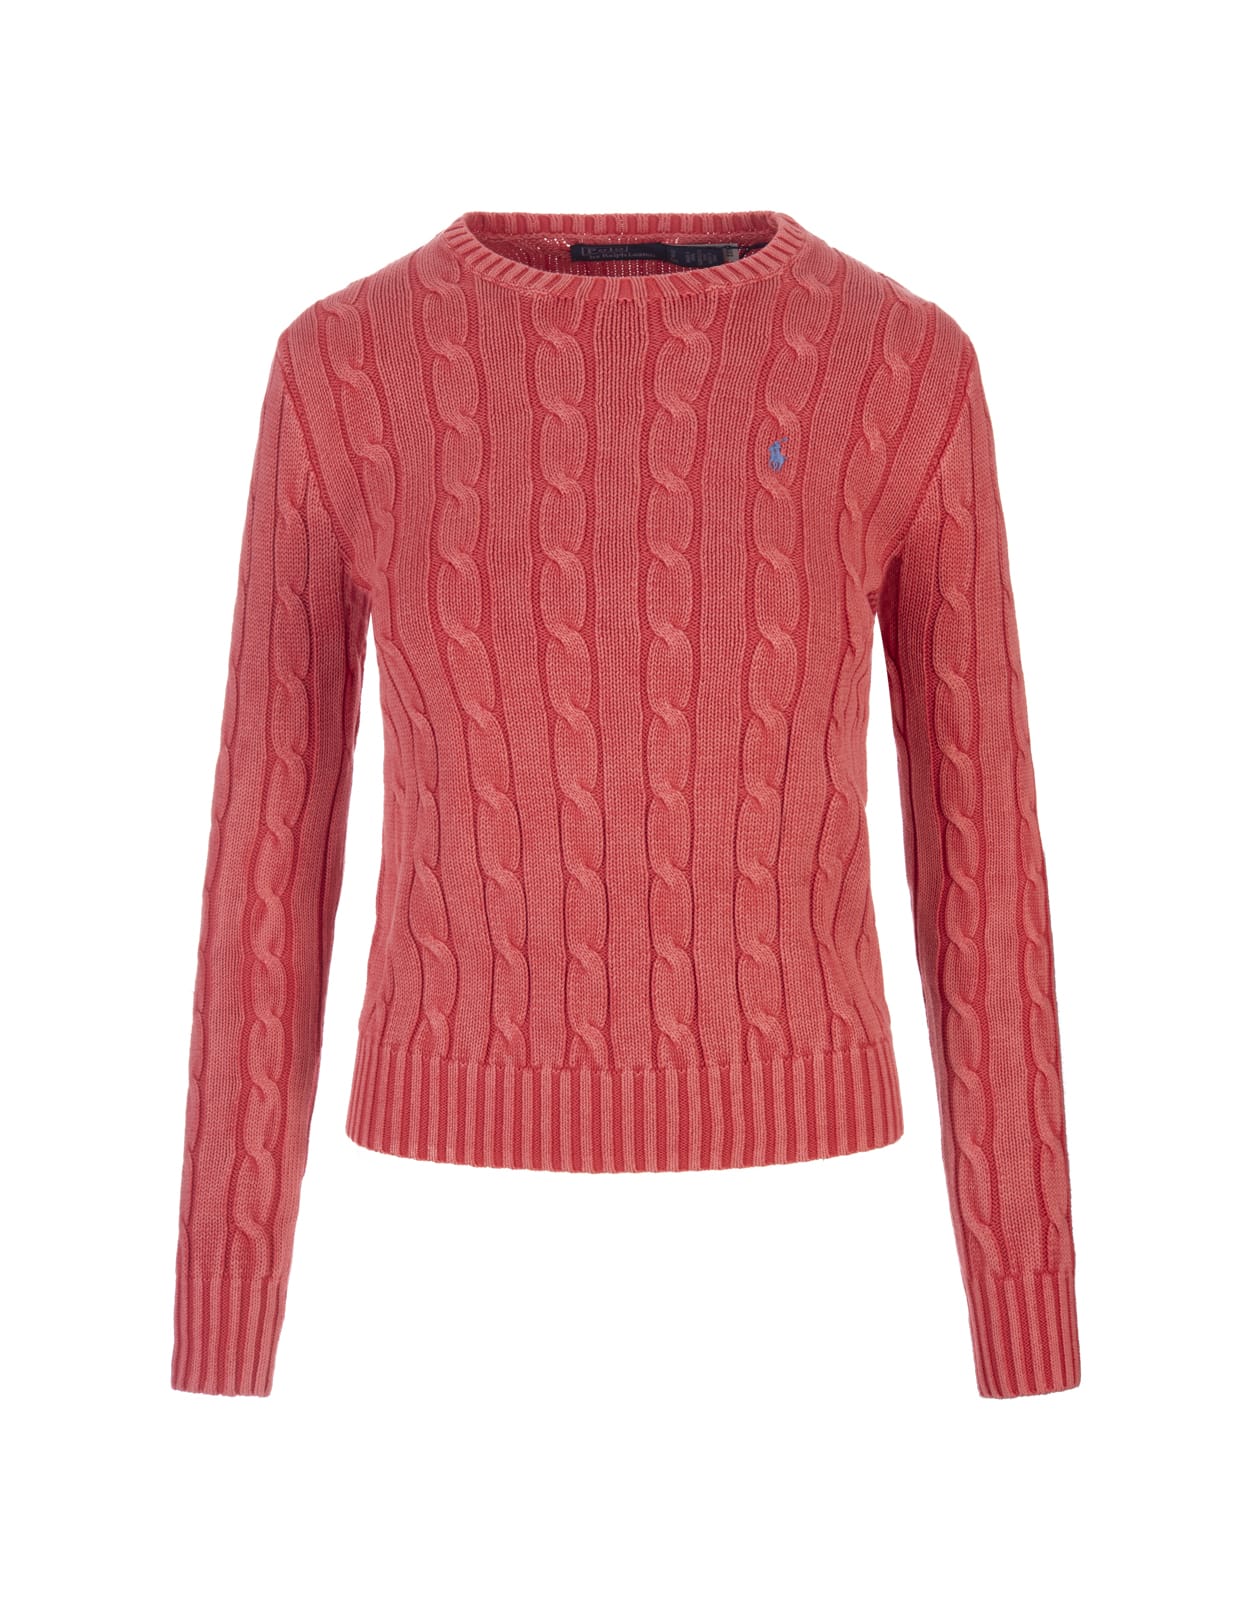 Coral Cable Cotton Sweater